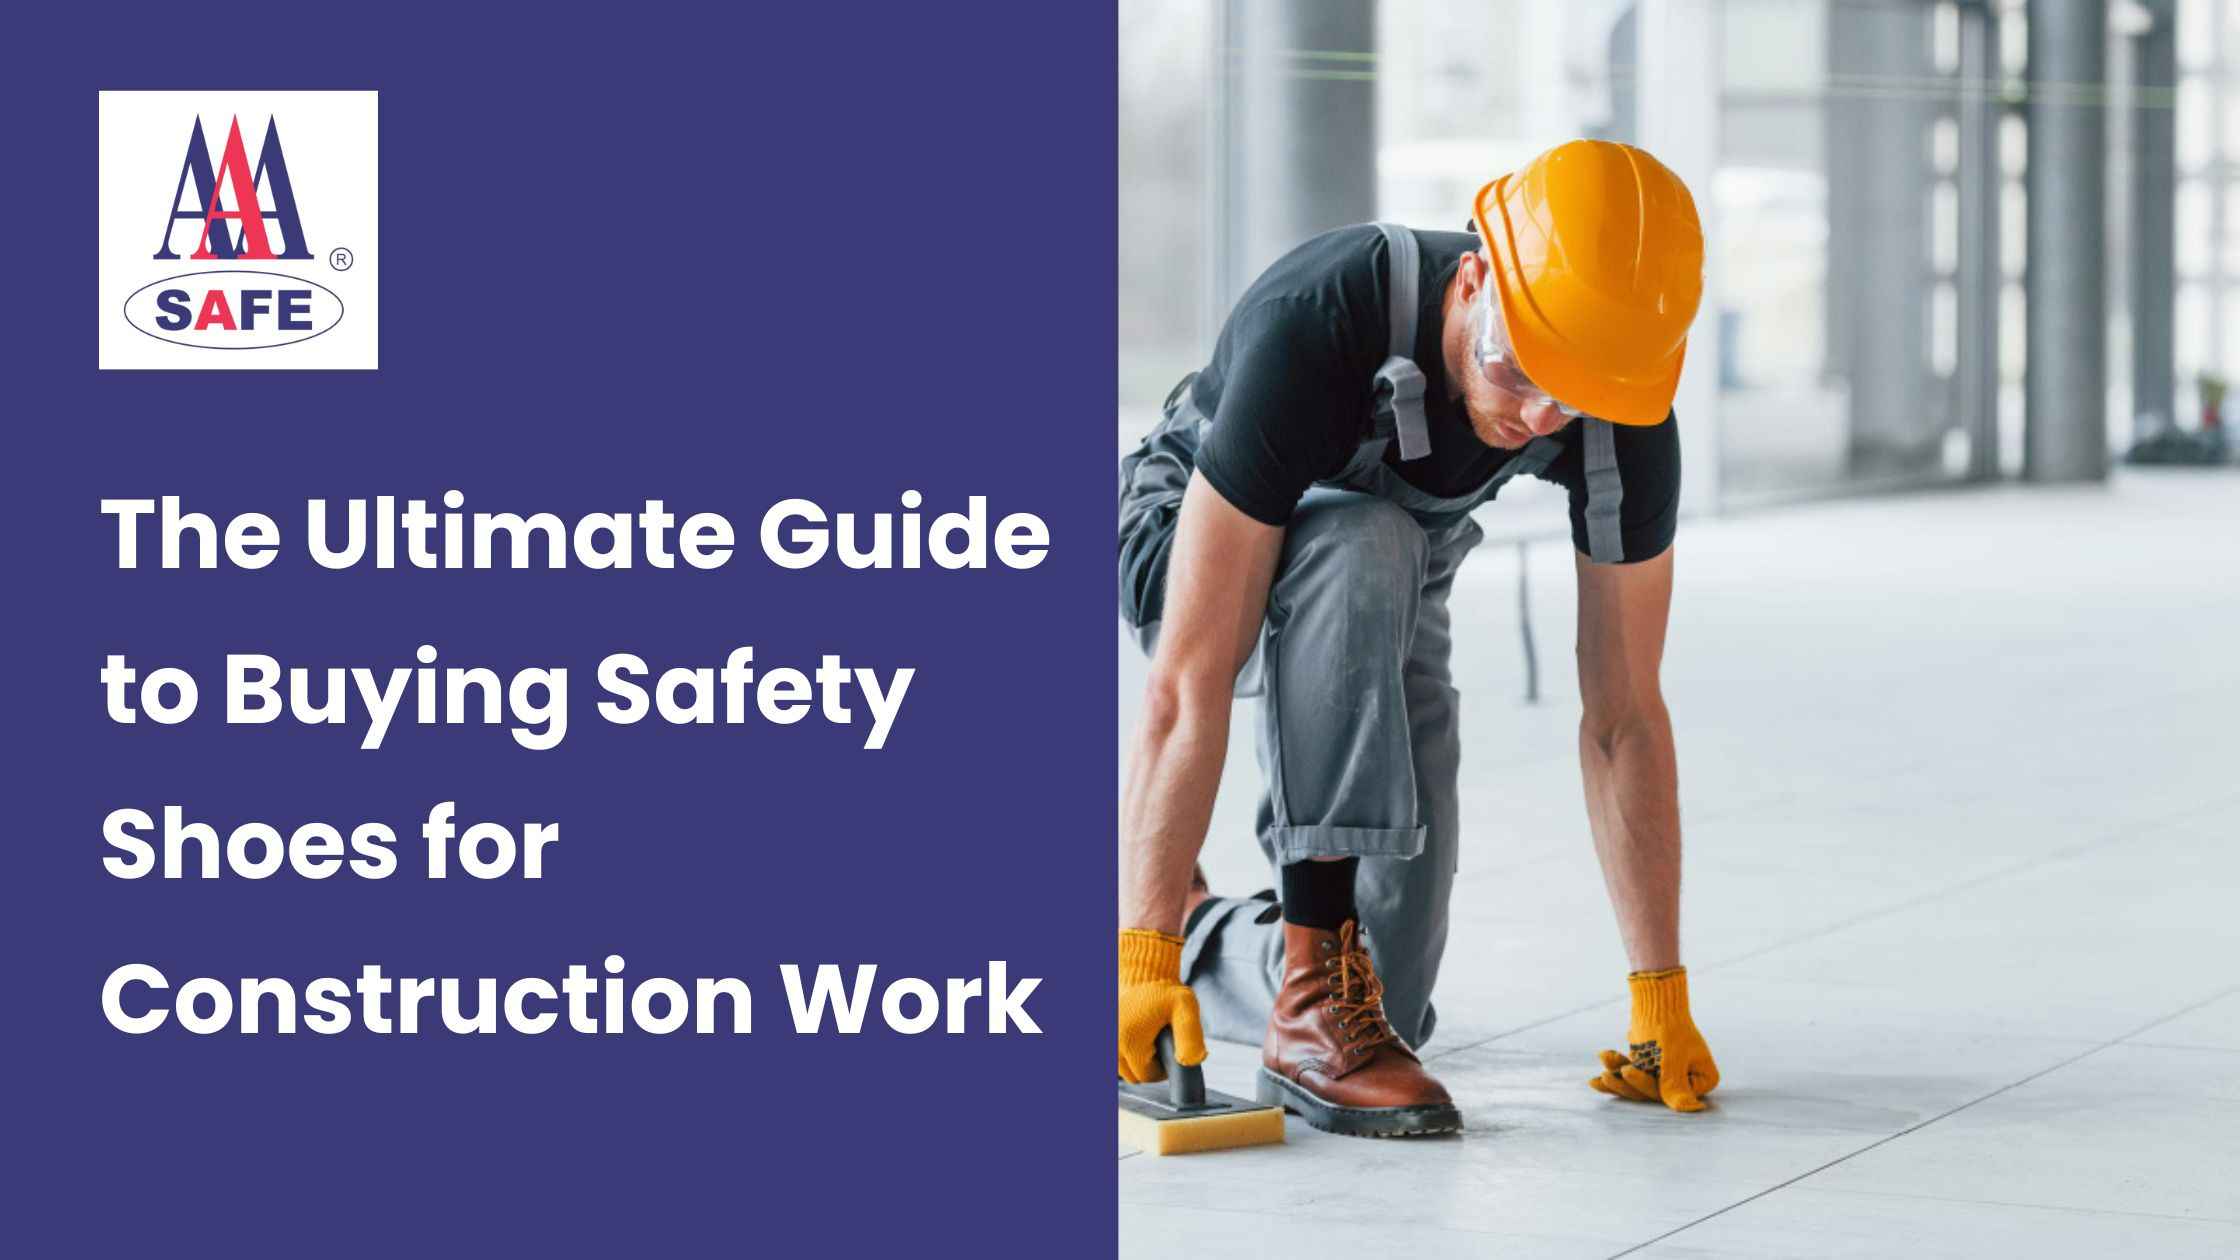 The Ultimate Guide to Buying Safety Shoes for Construction Work